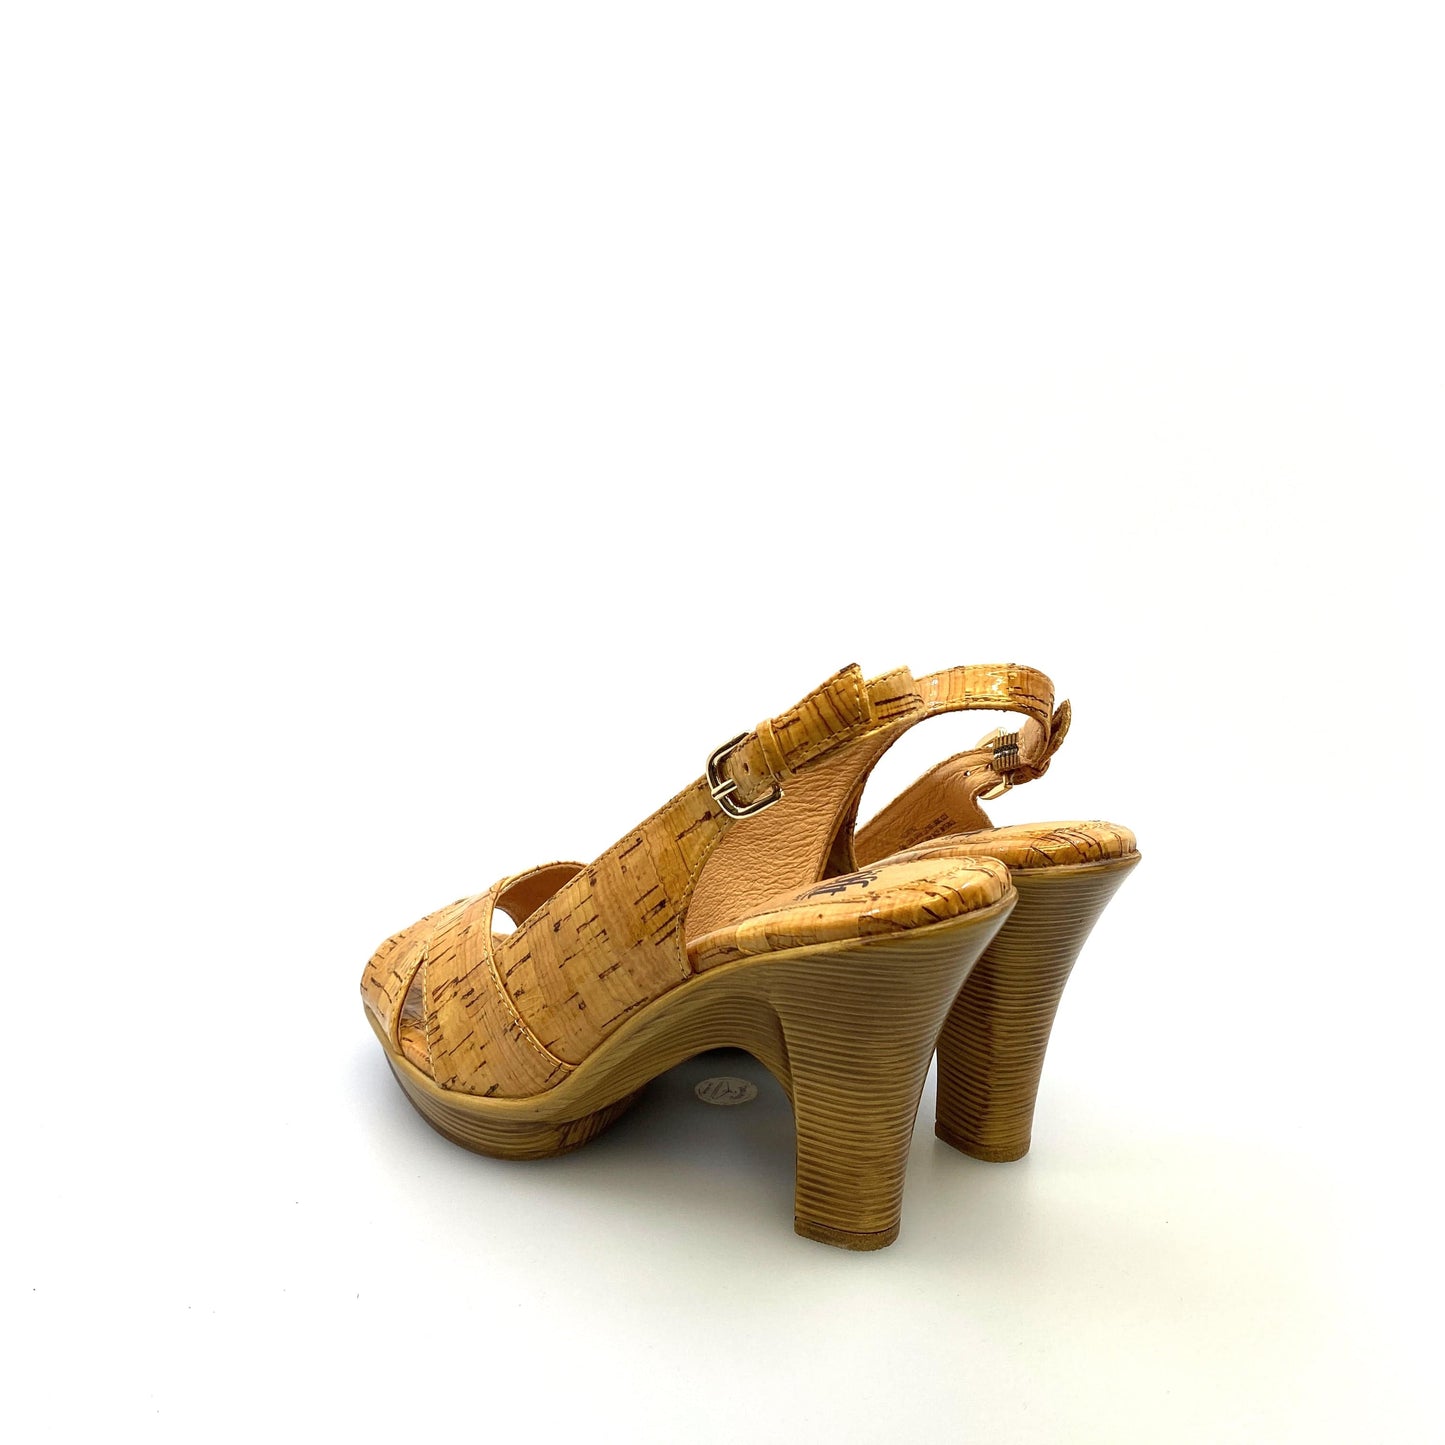 Sofft Womens “Portia” Size 6M Natural Laminated Cork Open-Toe Slingback Heels